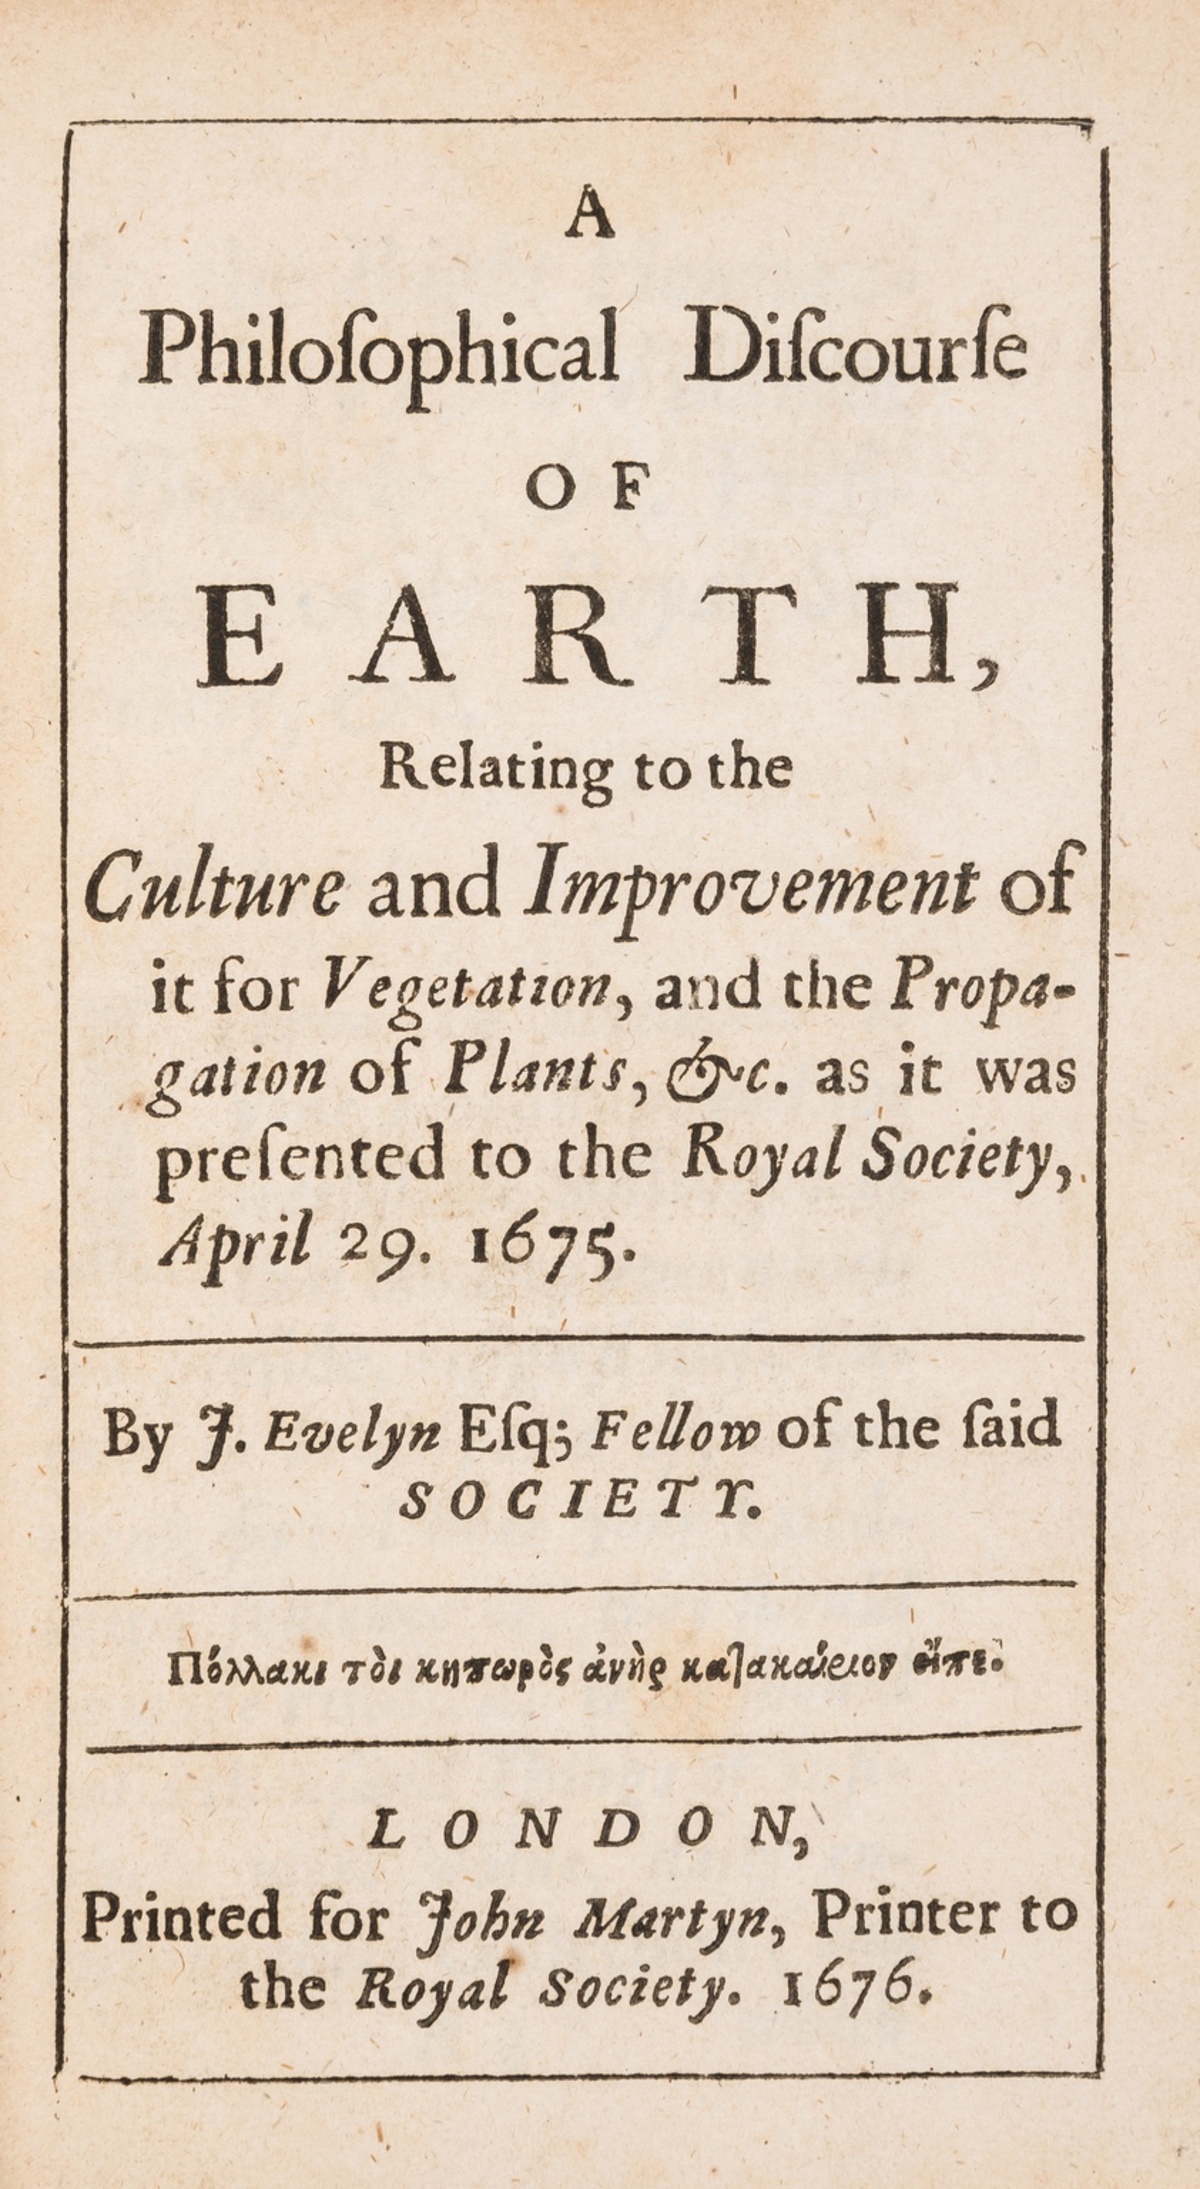 Evelyn (John) A Philosophical Discourse of Earth, Relating to the Culture and Improvement of it …